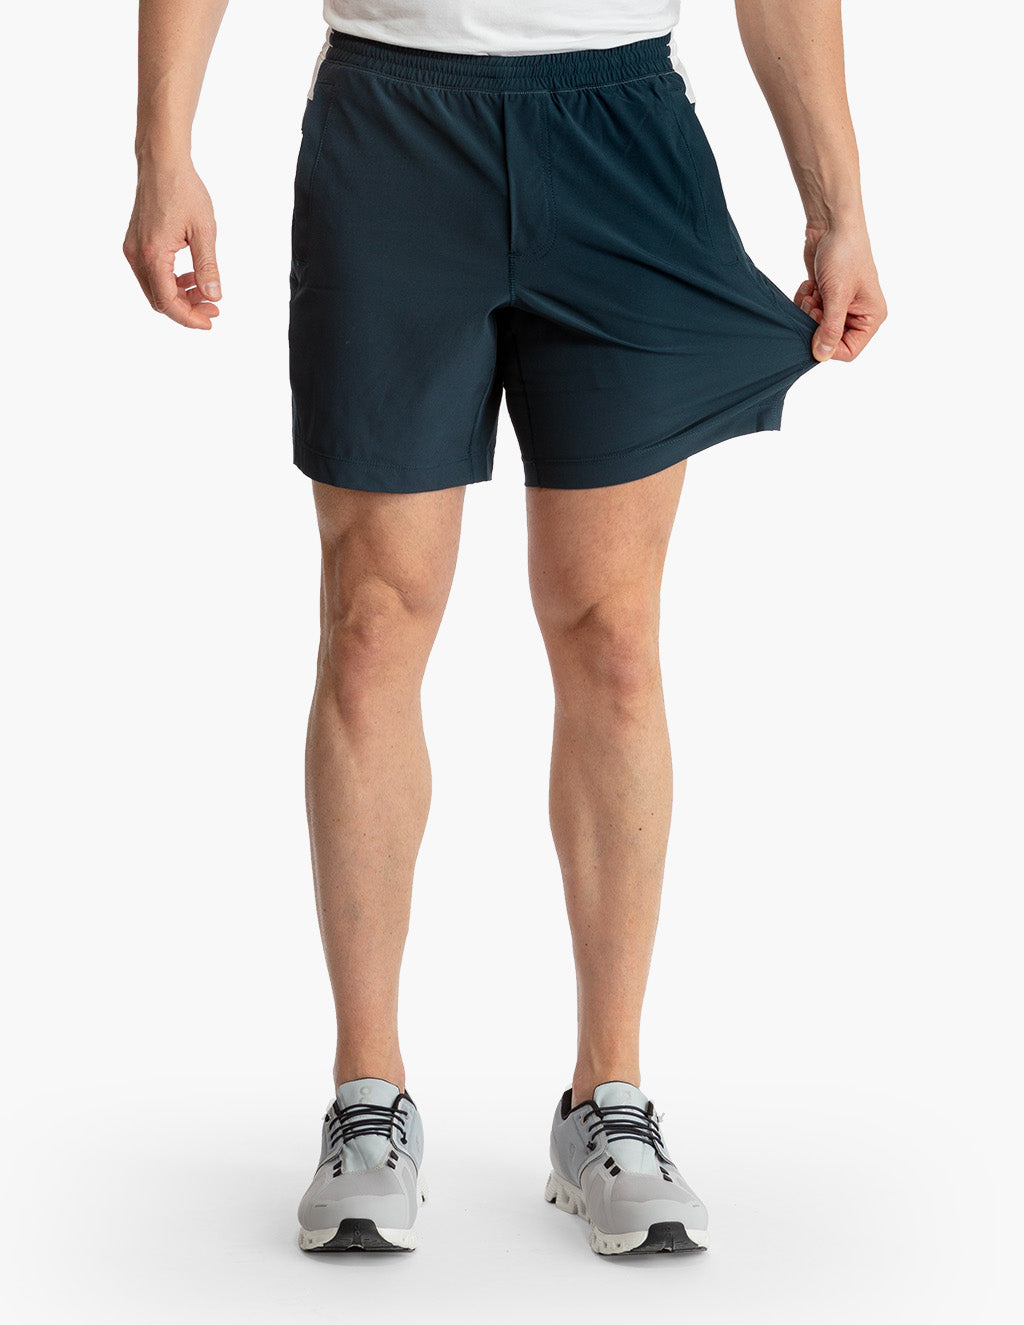 Best Lululemon Shorts For Working Out Now  International Society of  Precision Agriculture